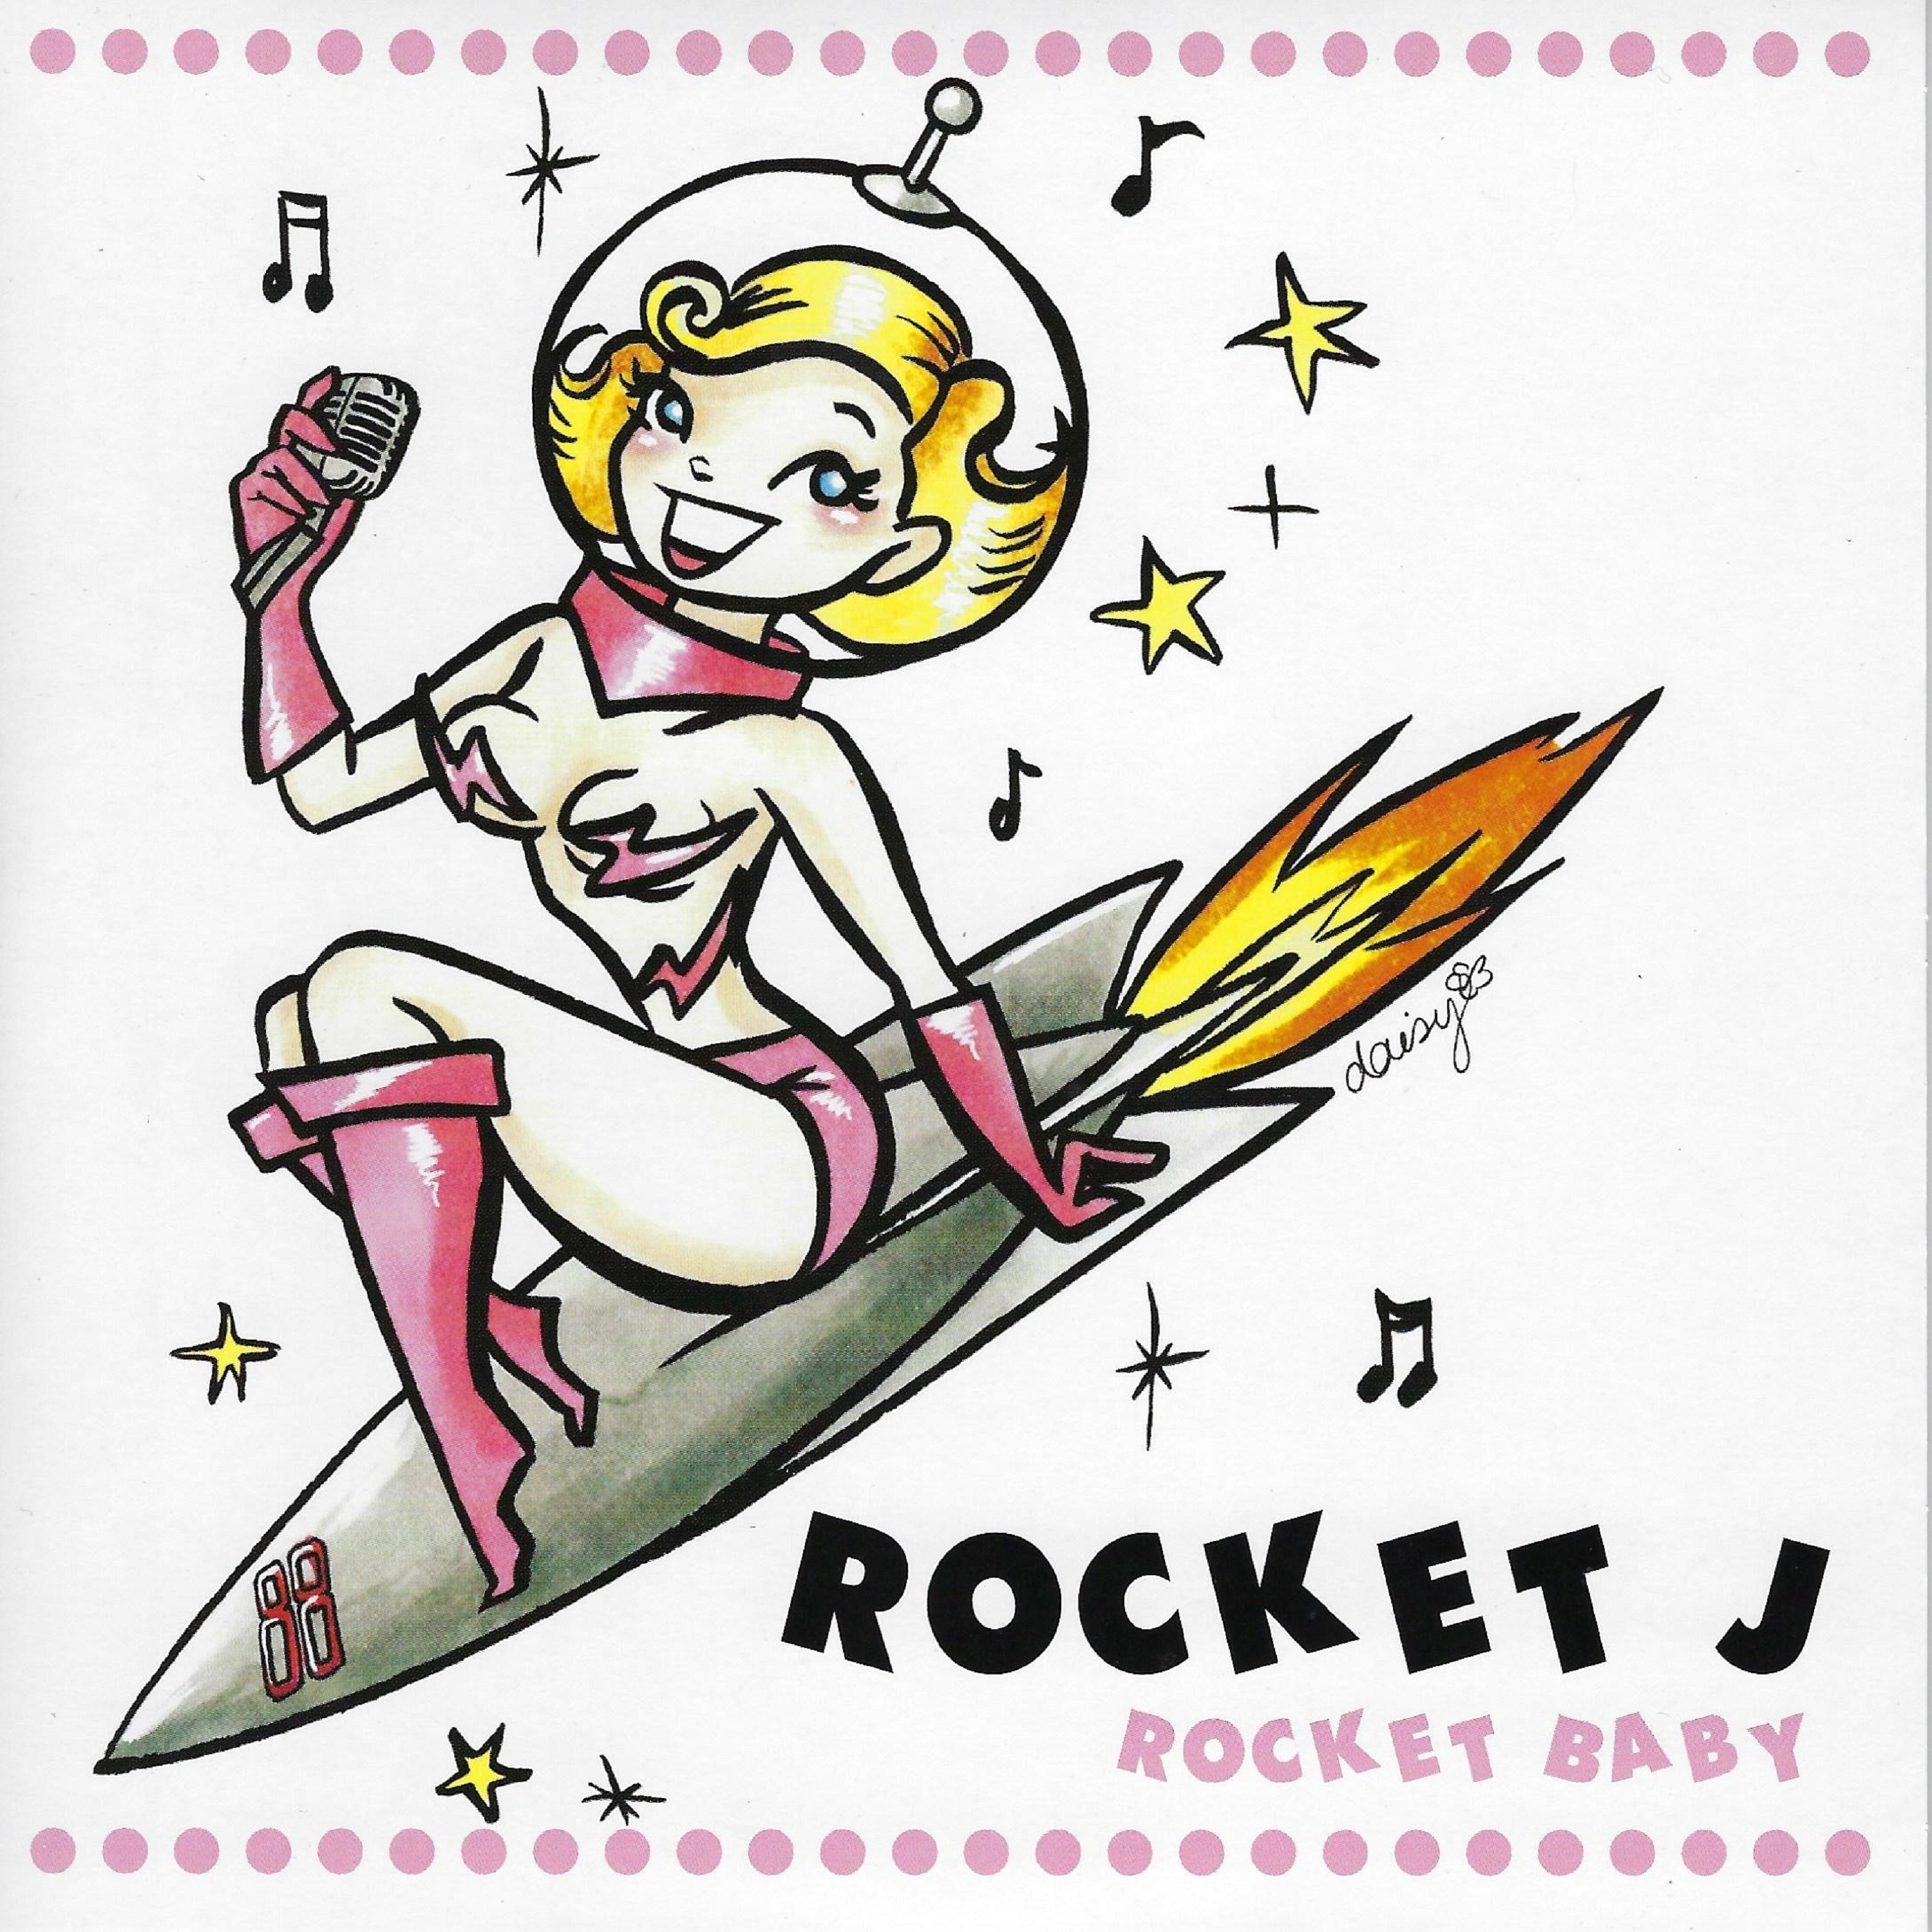 Songs and lyrics from ReverbNation Artist Rocket J & The 88's, Roc...